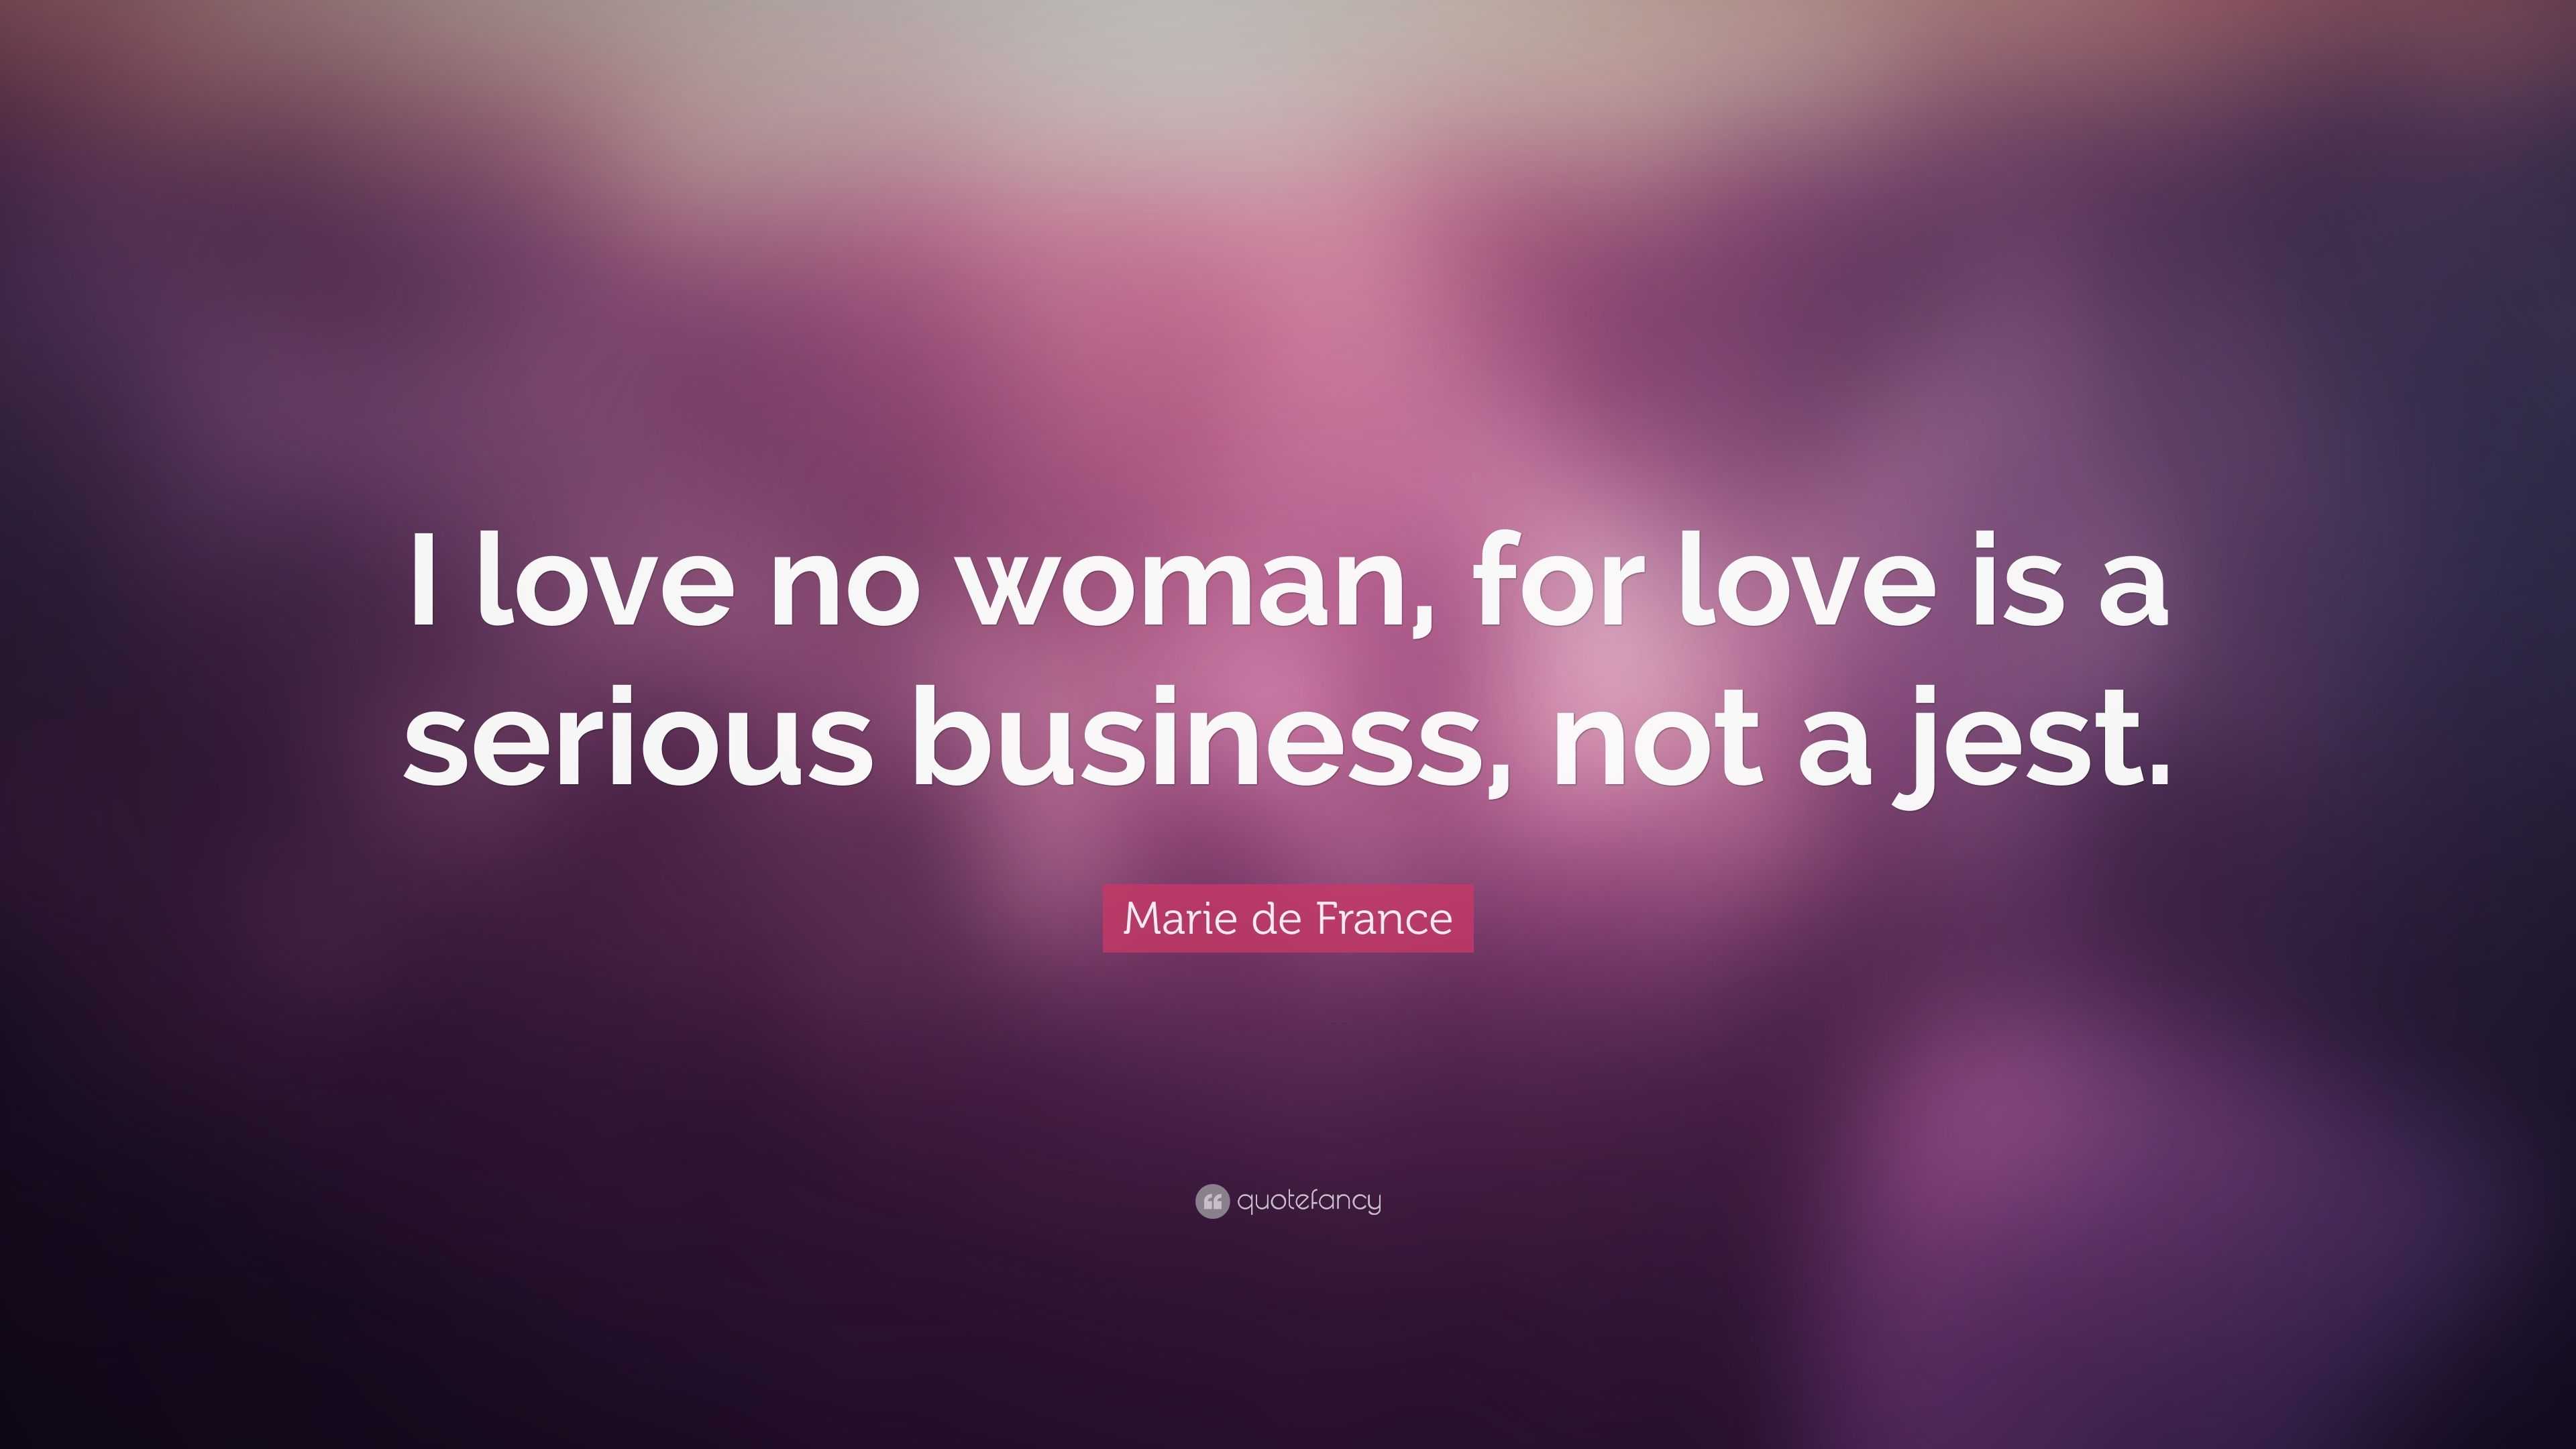 Marie de France Quote: “I love no woman, for love is a serious